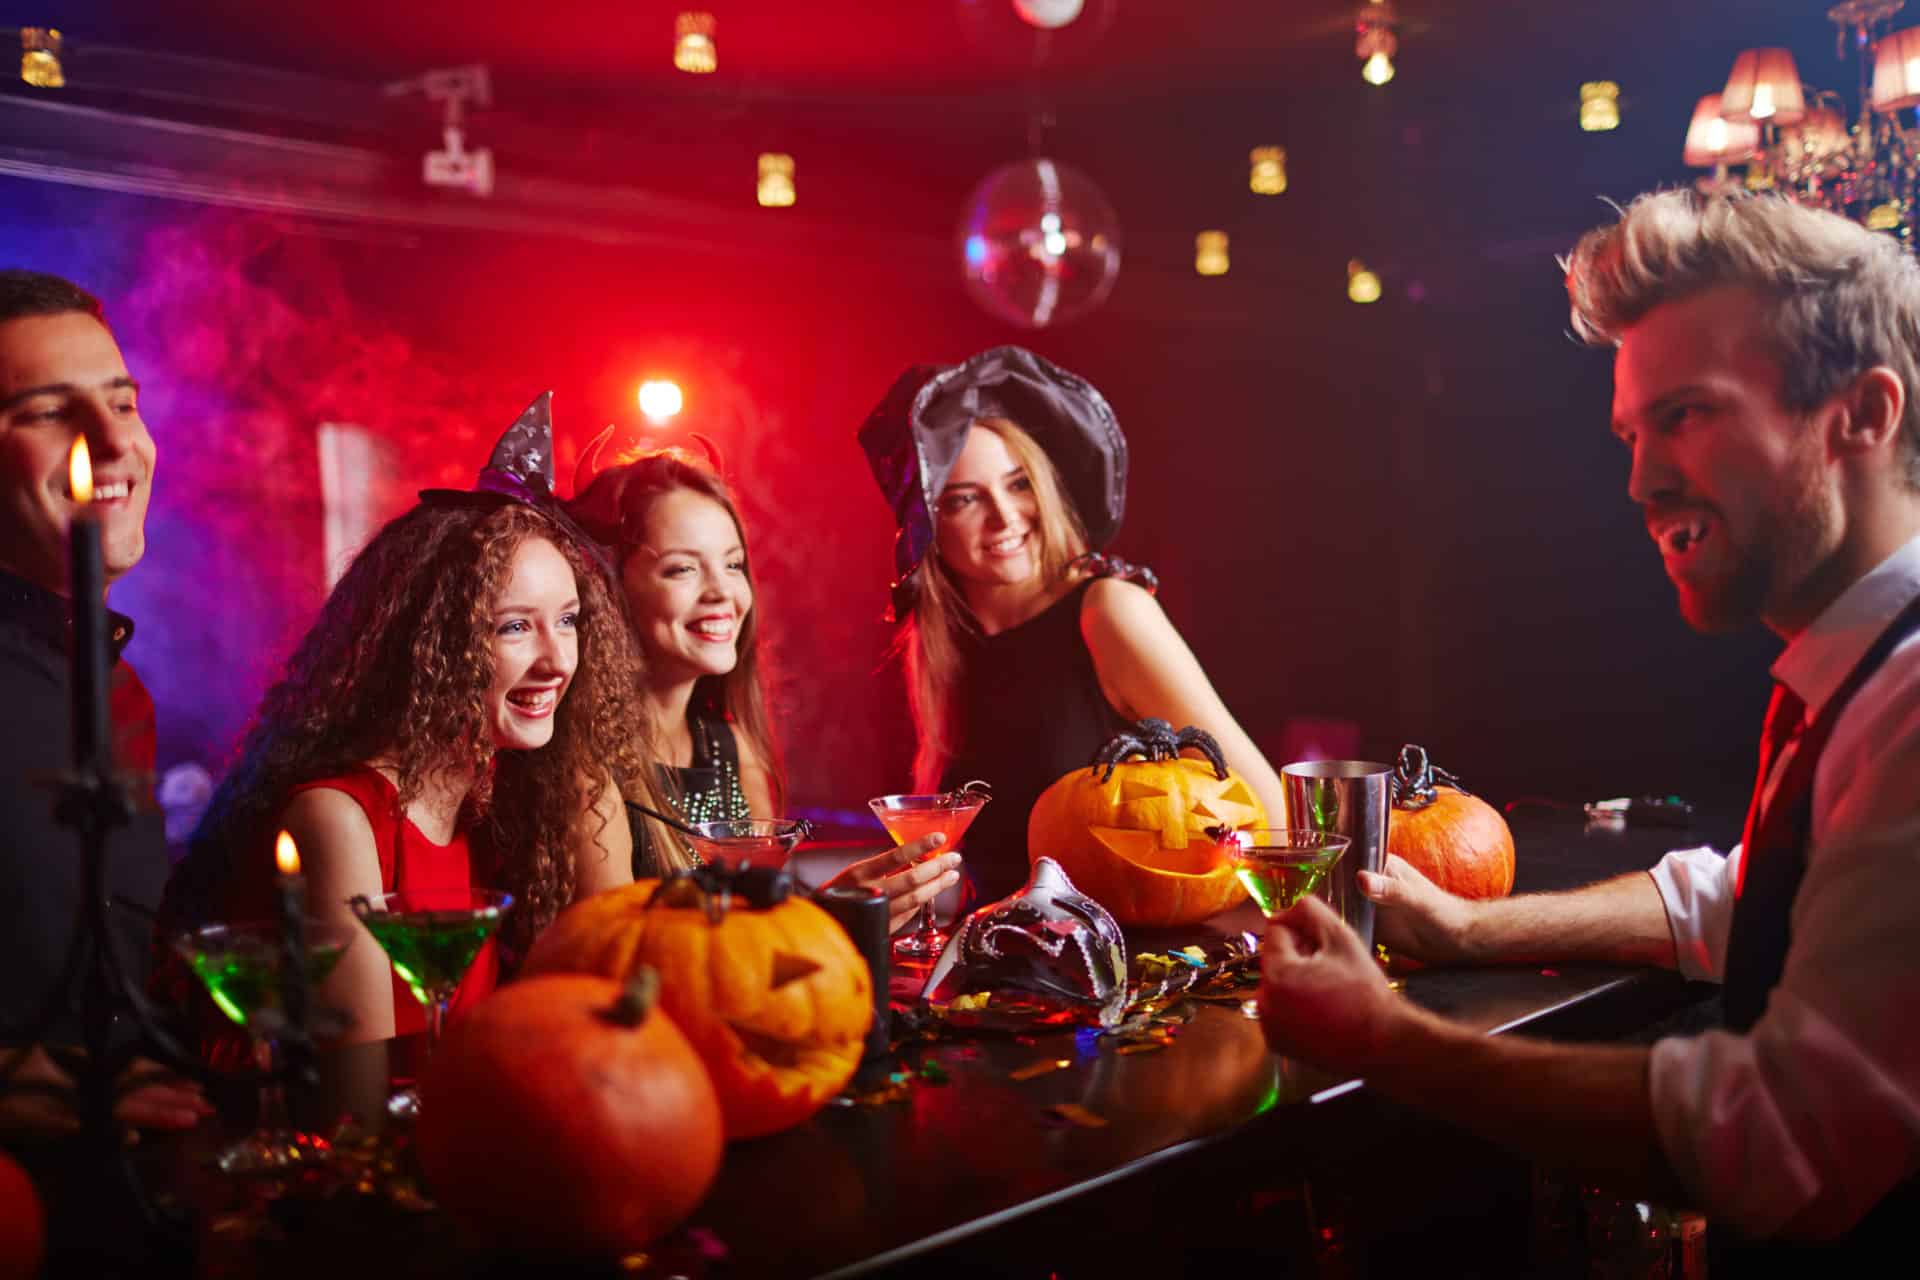 What NYers Should Know about Drunk Driving on Halloween